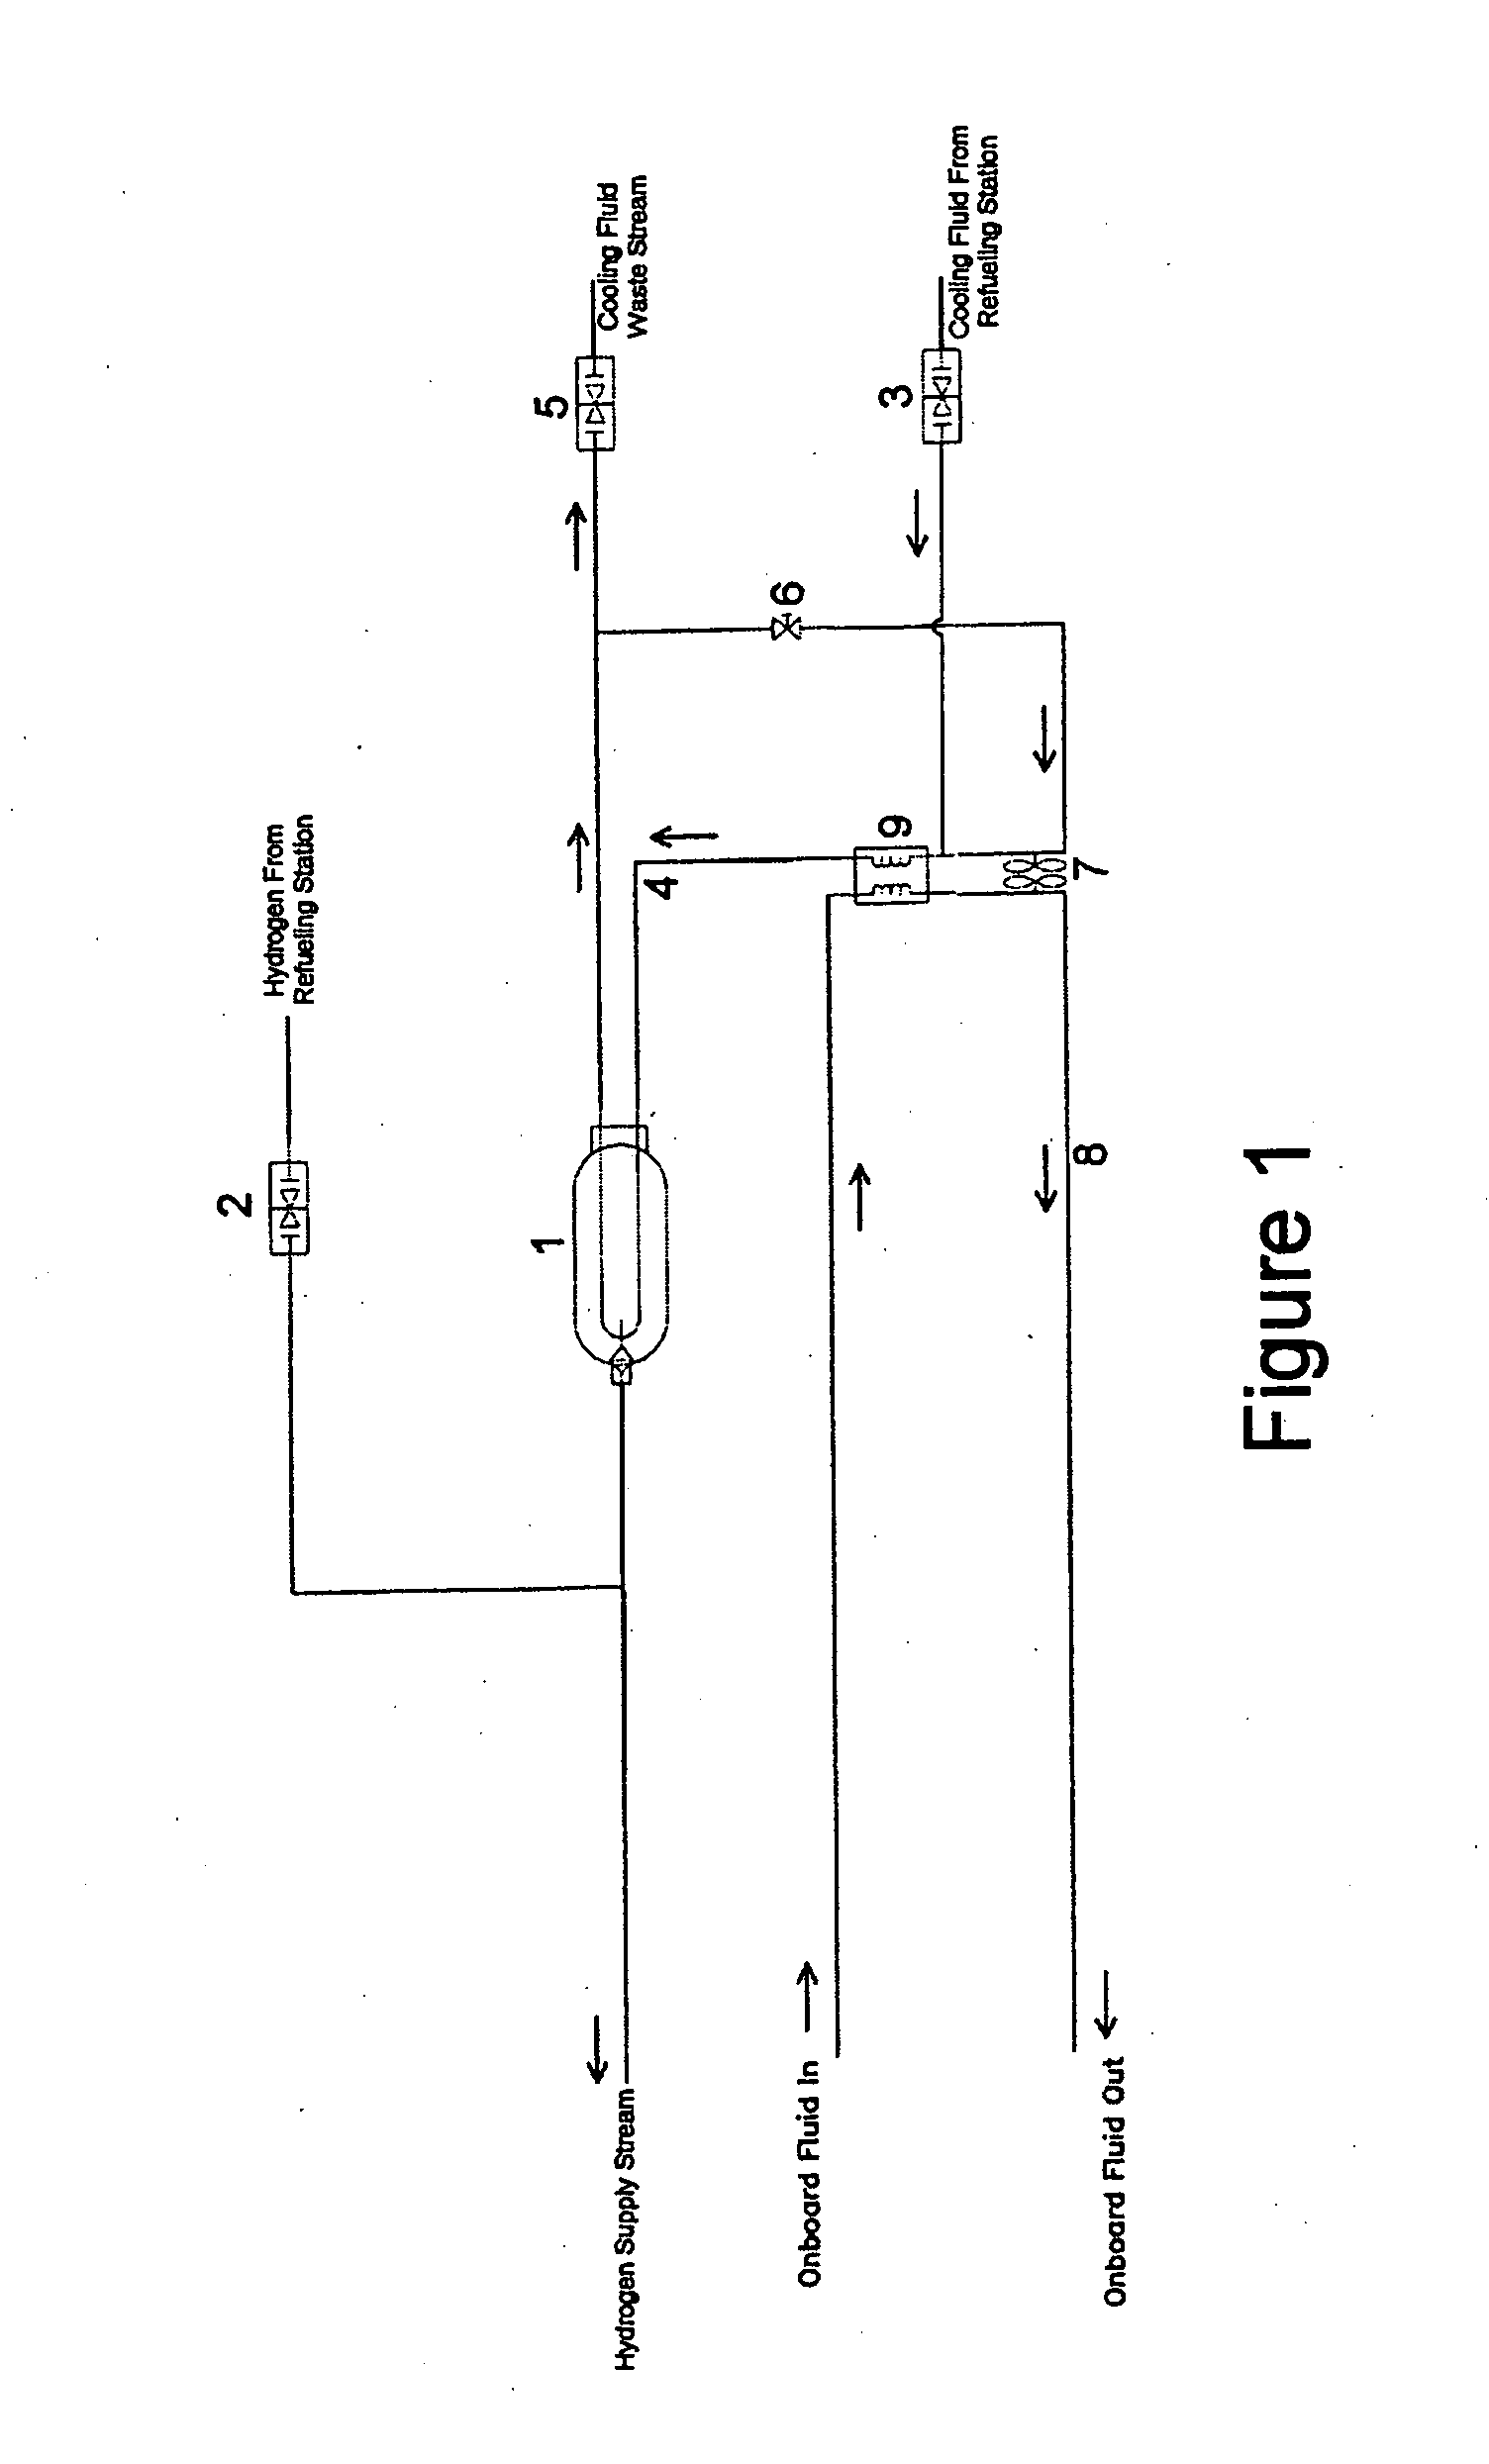 Onboard hydrogen storage unit with heat transfer system for use in a hydrogen powered vehicle